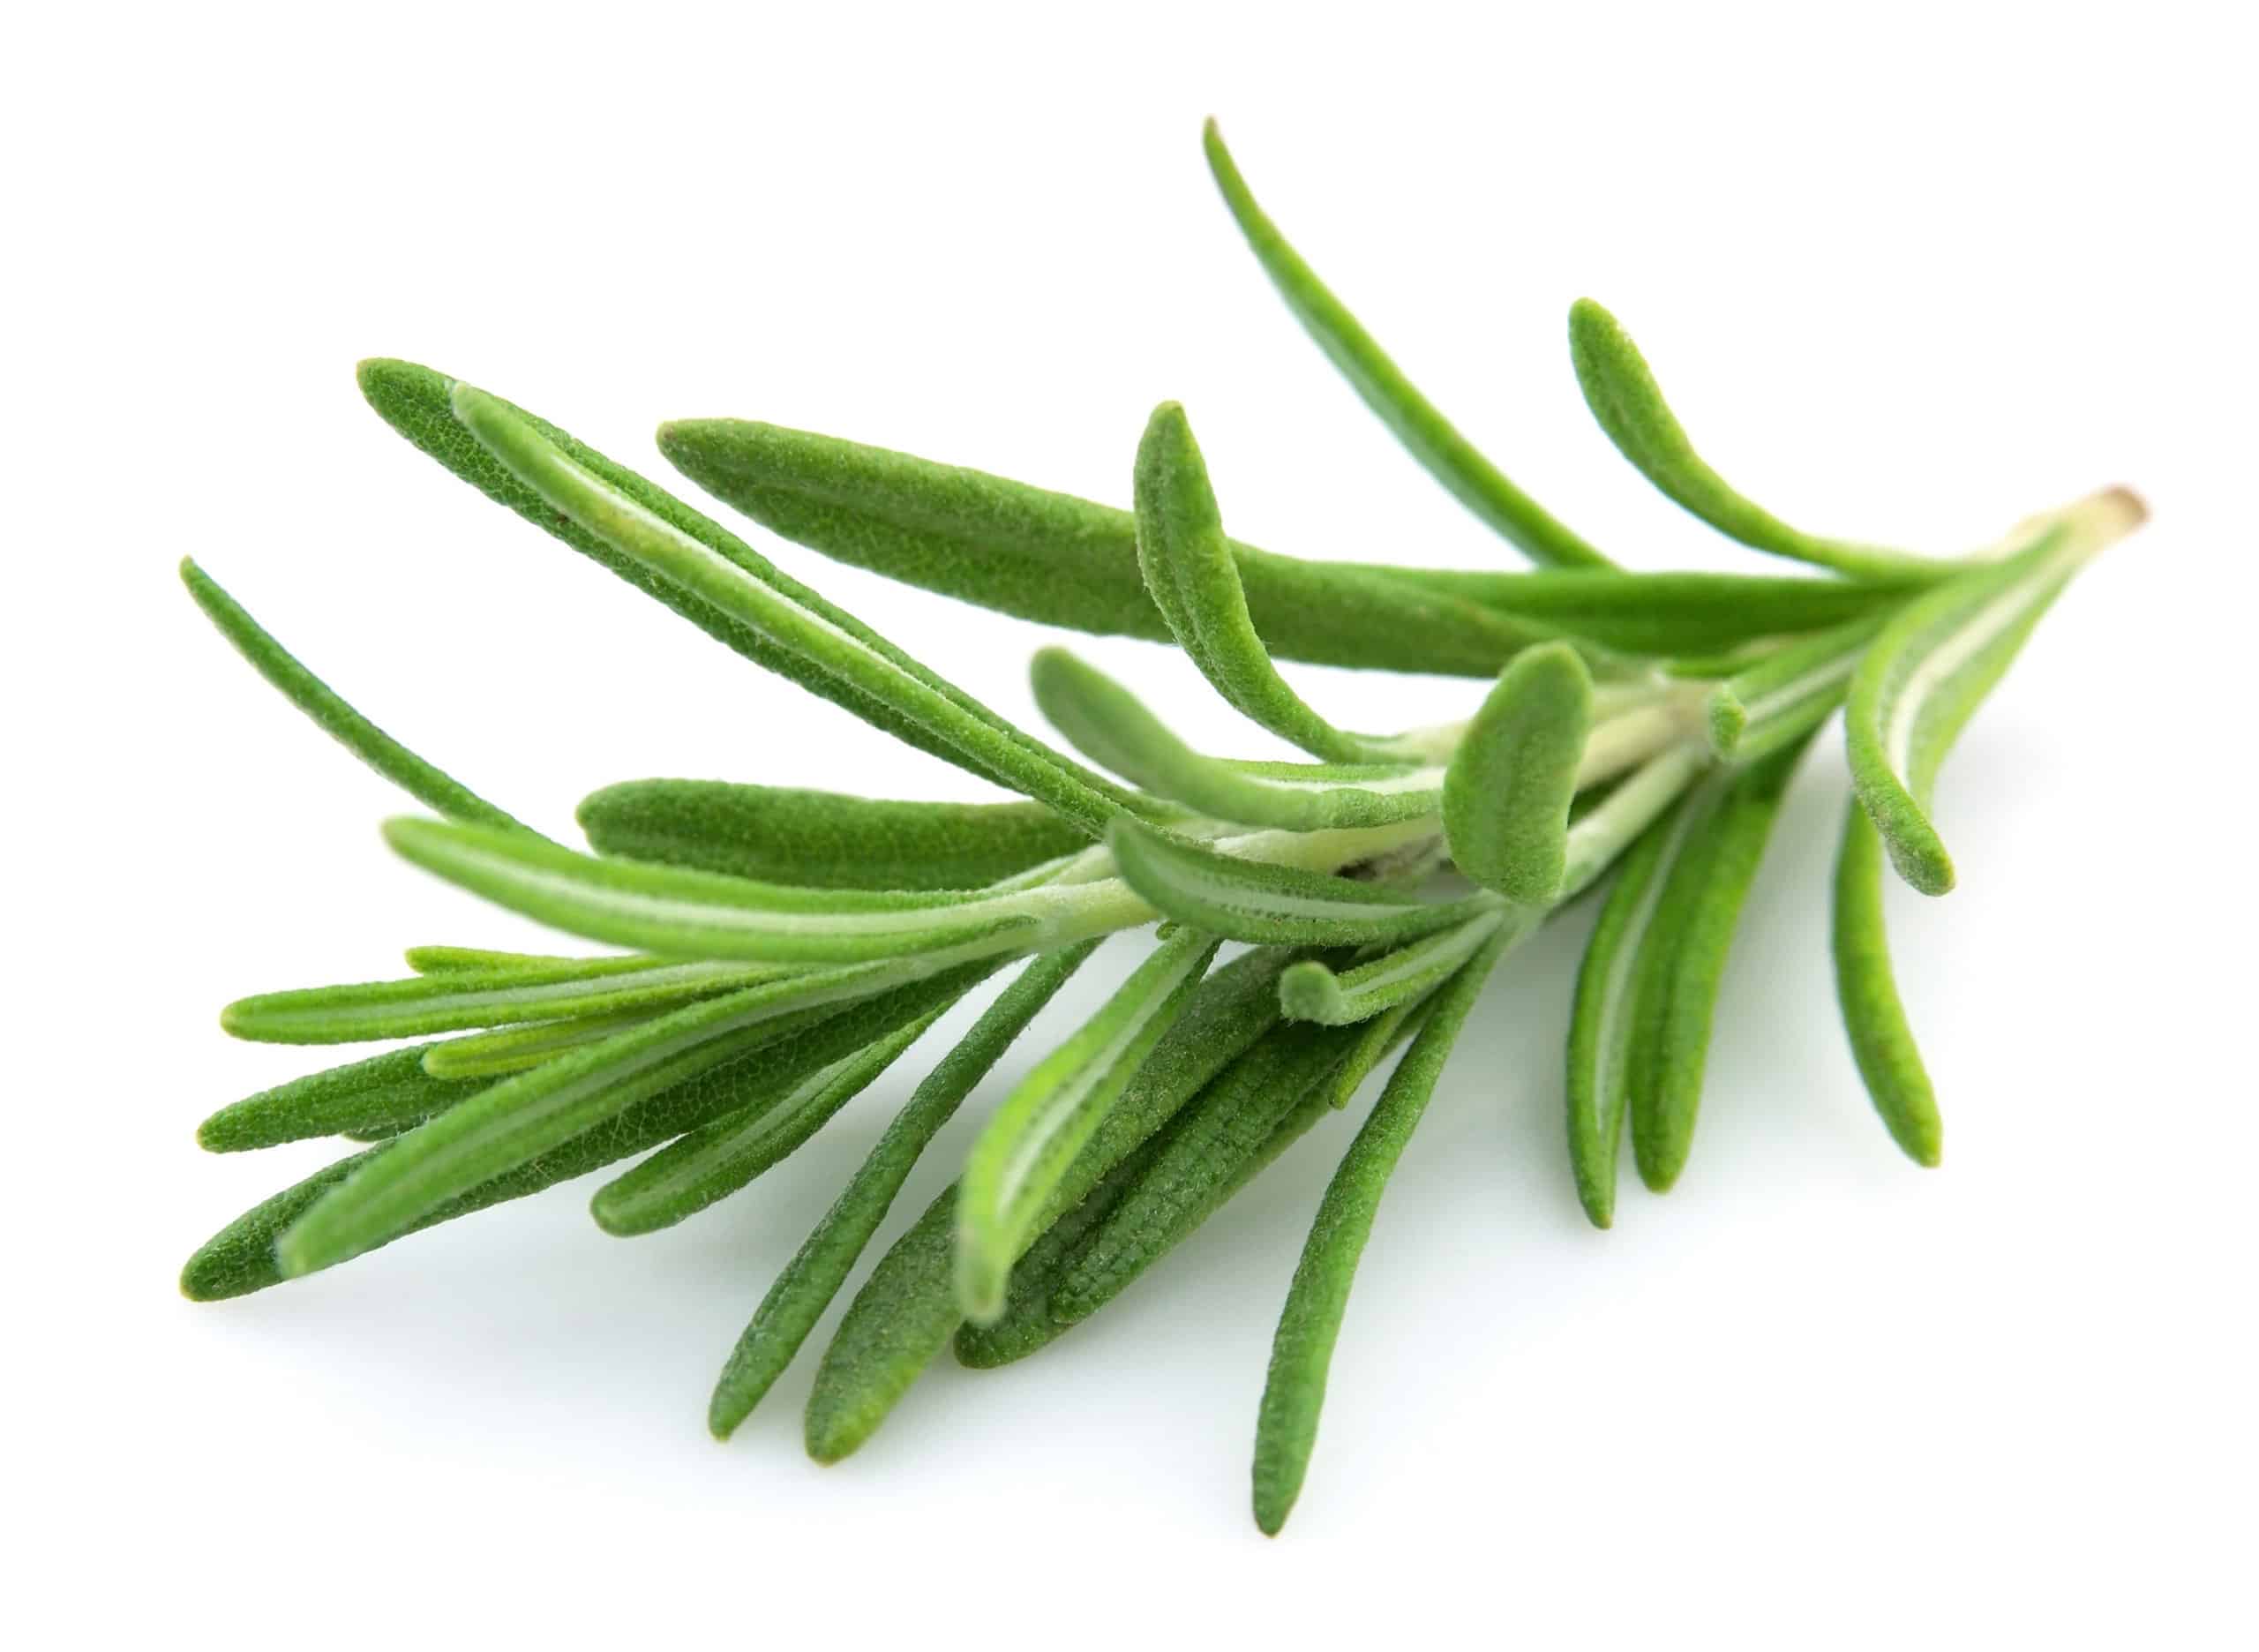 Rosemary: Health benefits, precautions, and drug interactions